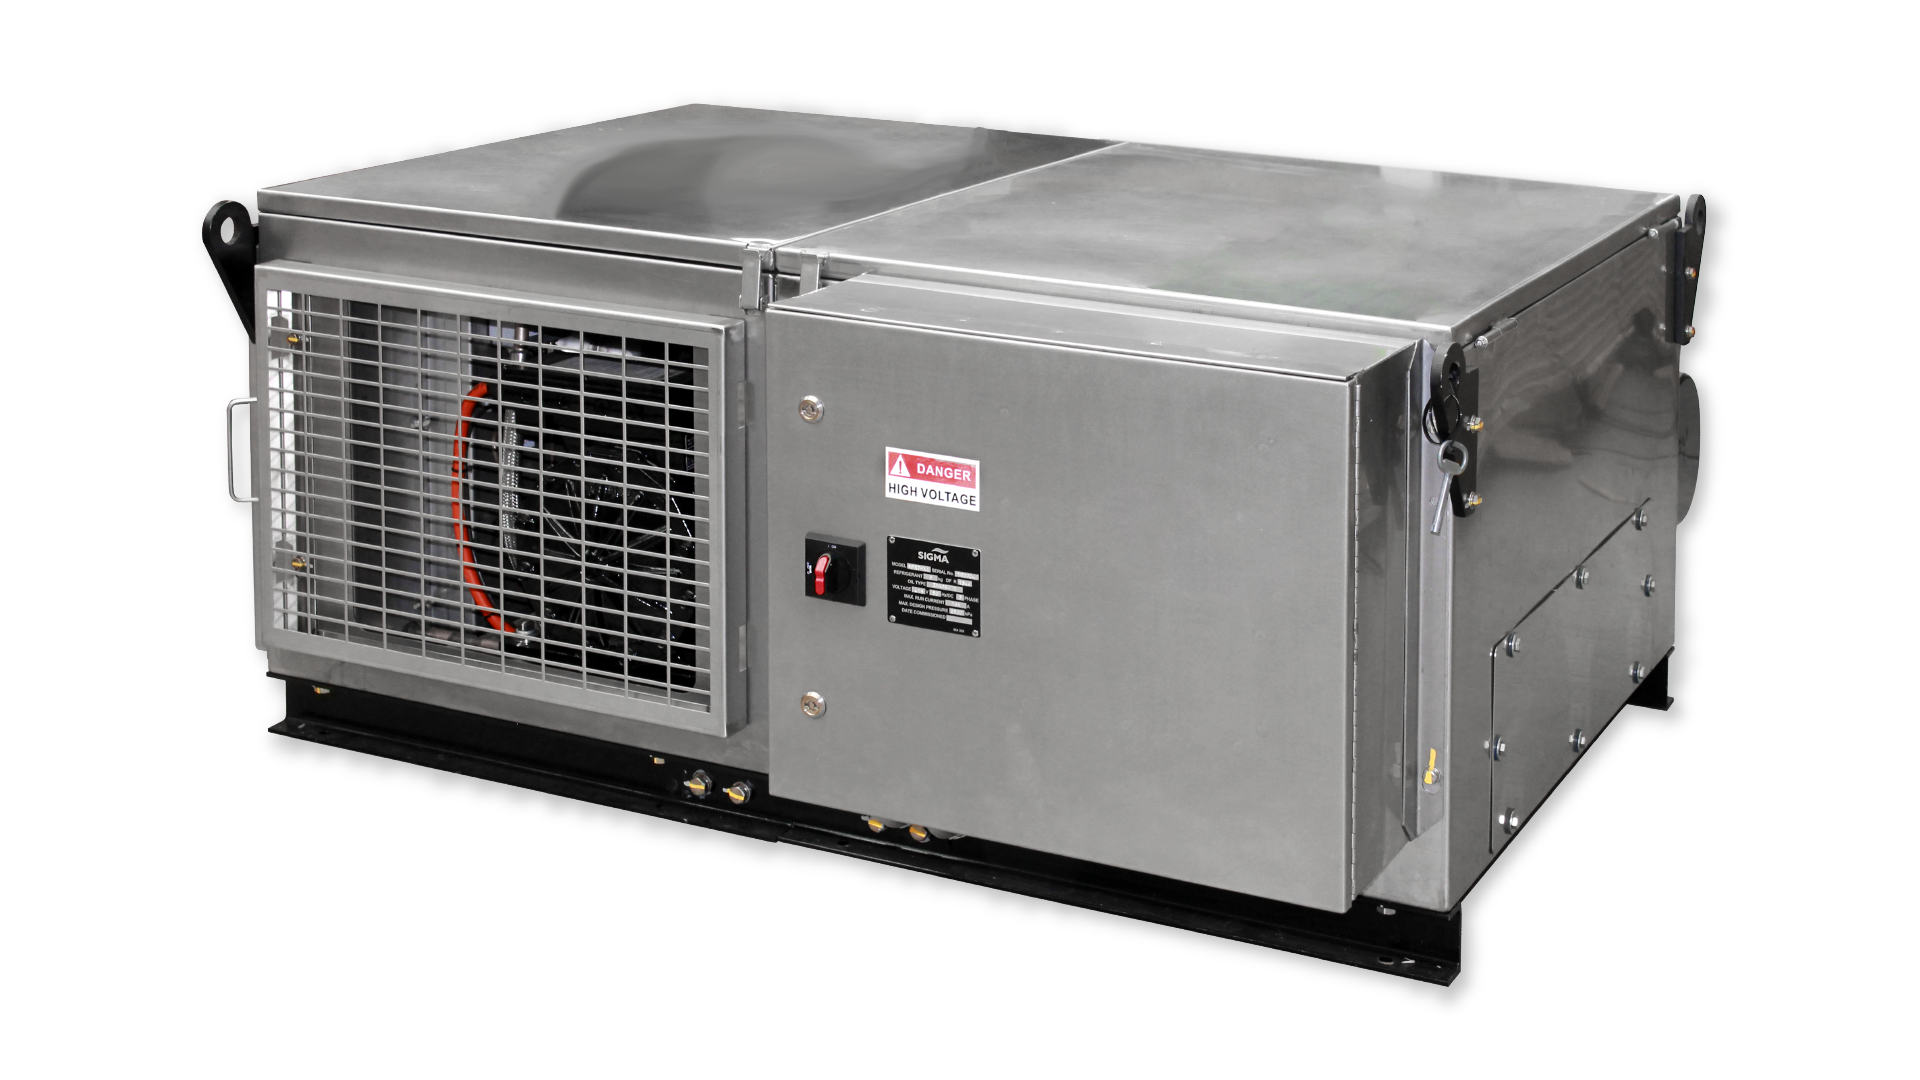 MPR7MX1 - Rooftop Packaged HVAC Unit | SIGMA Air Conditioning